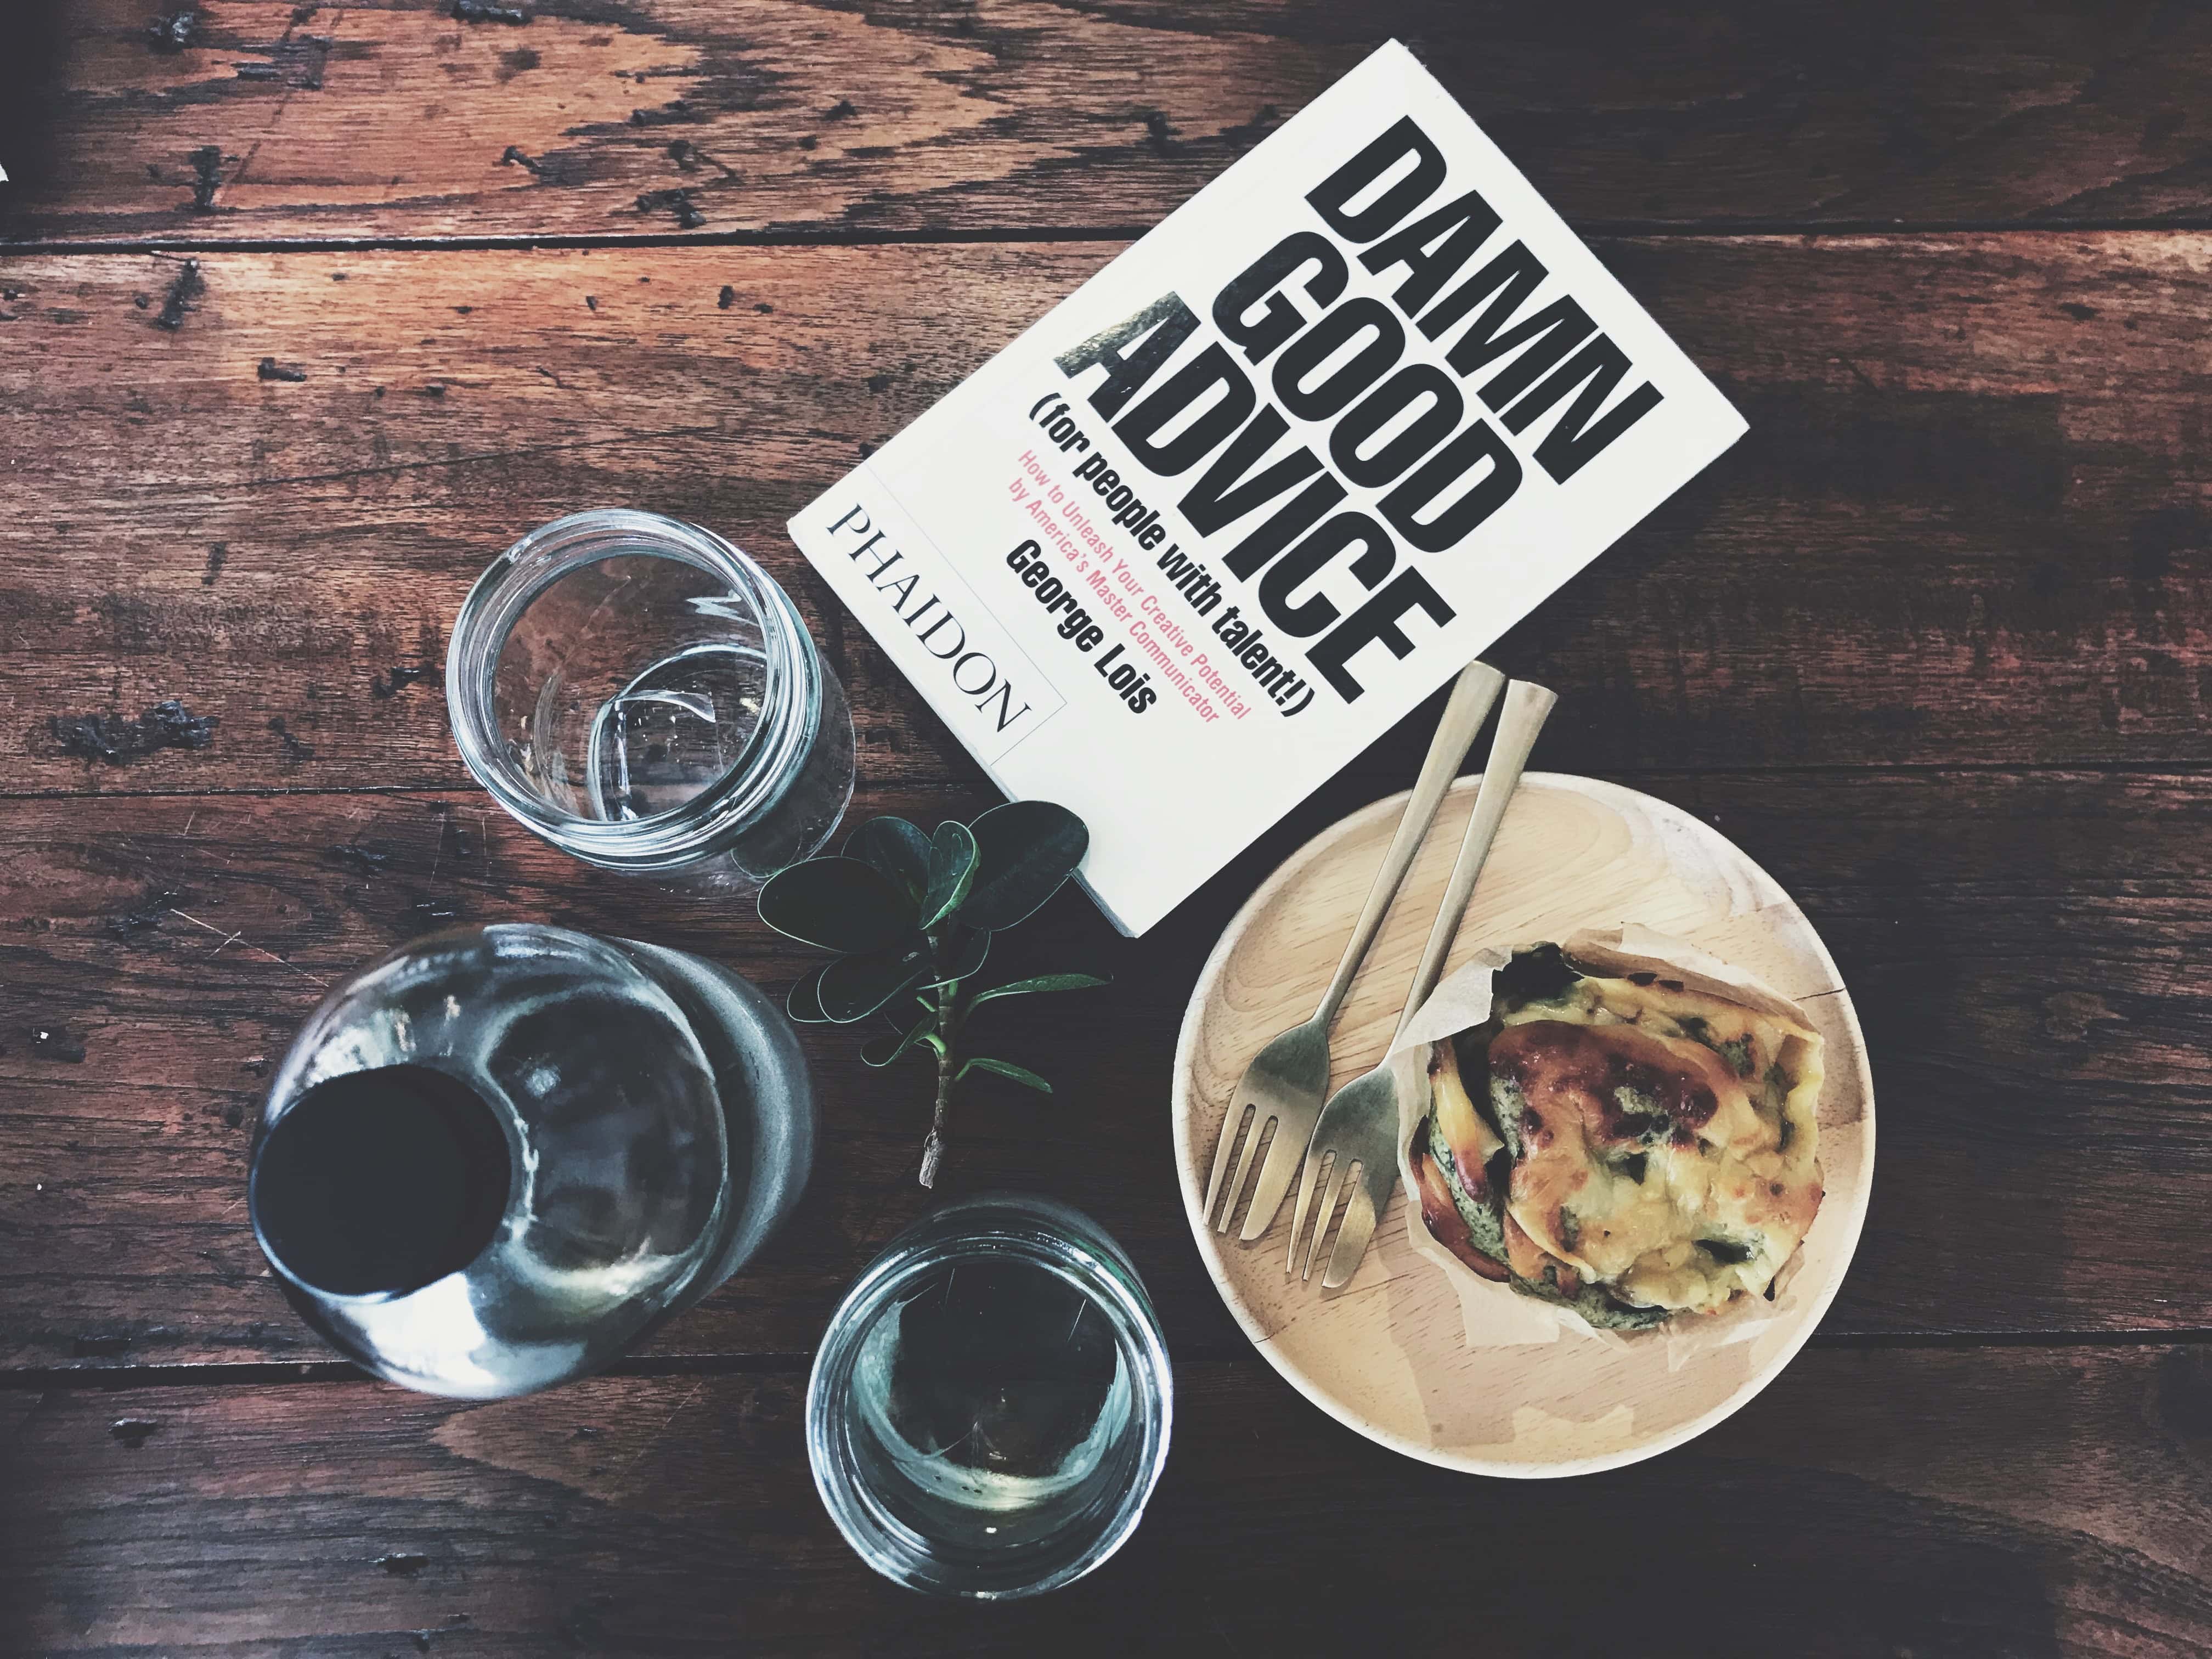 Flat lay of a book with 'damn good advice' as the title next to food and water